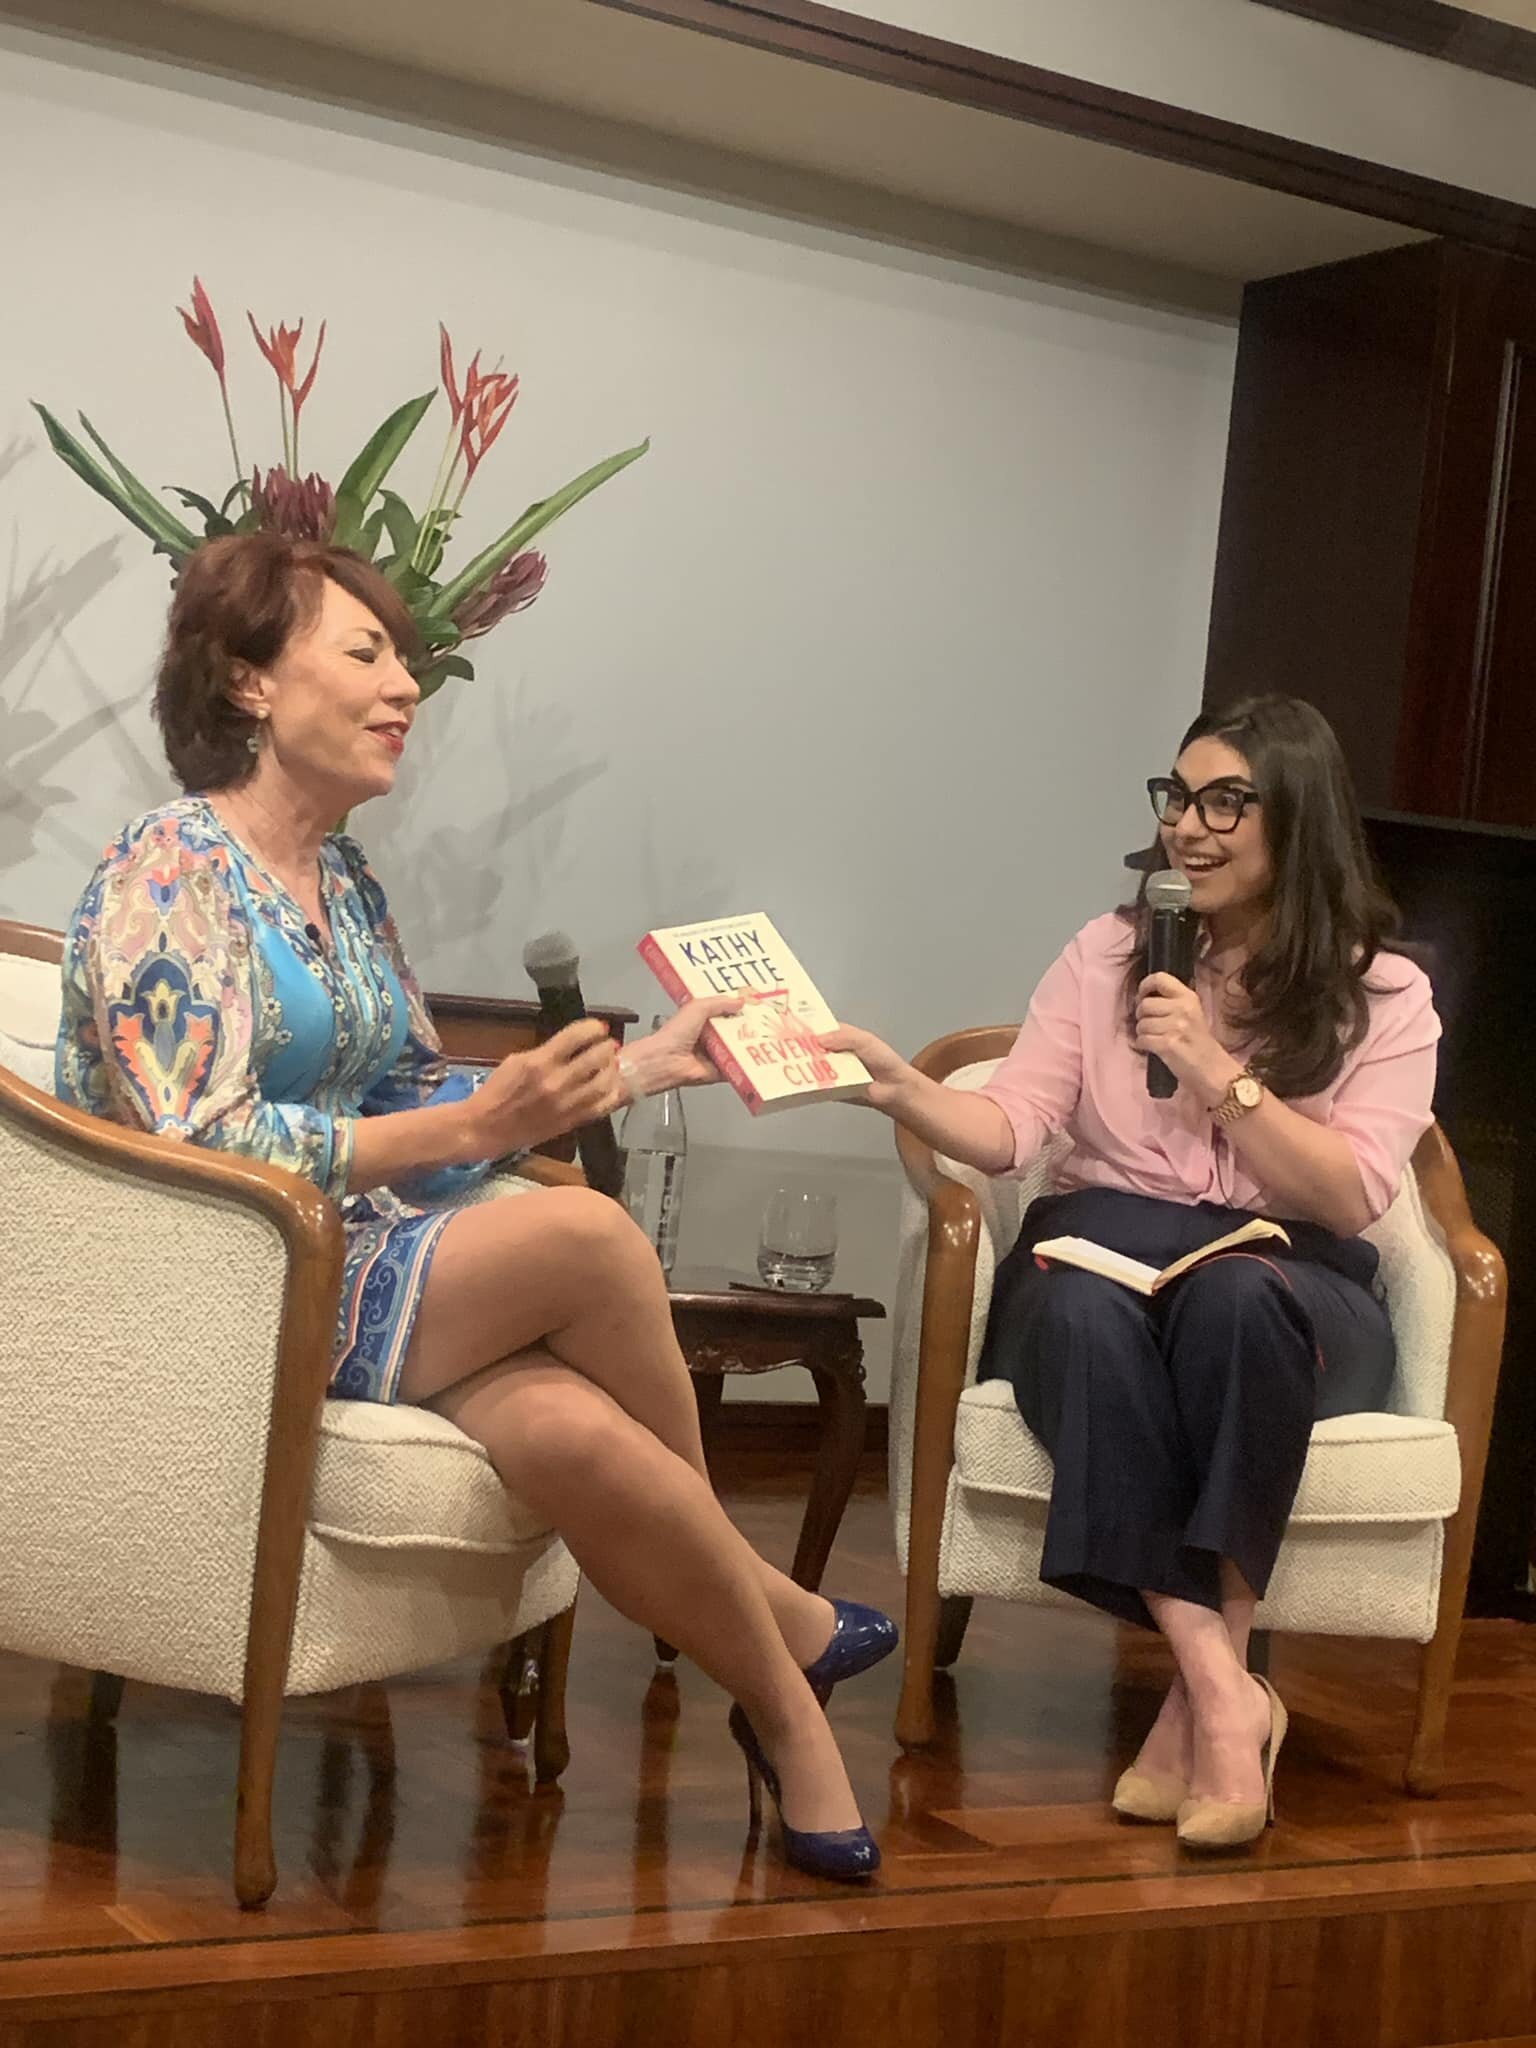 An evening with Kathy Lette .... - https://mailchi.mp/suzanneleal/nibpeopleschoicewinner-16626045  @kathy.lette @thewomensclub1901  #books #thursdaybookclubwithsuzanne #thursdaybookclub @bloomsburypublishing